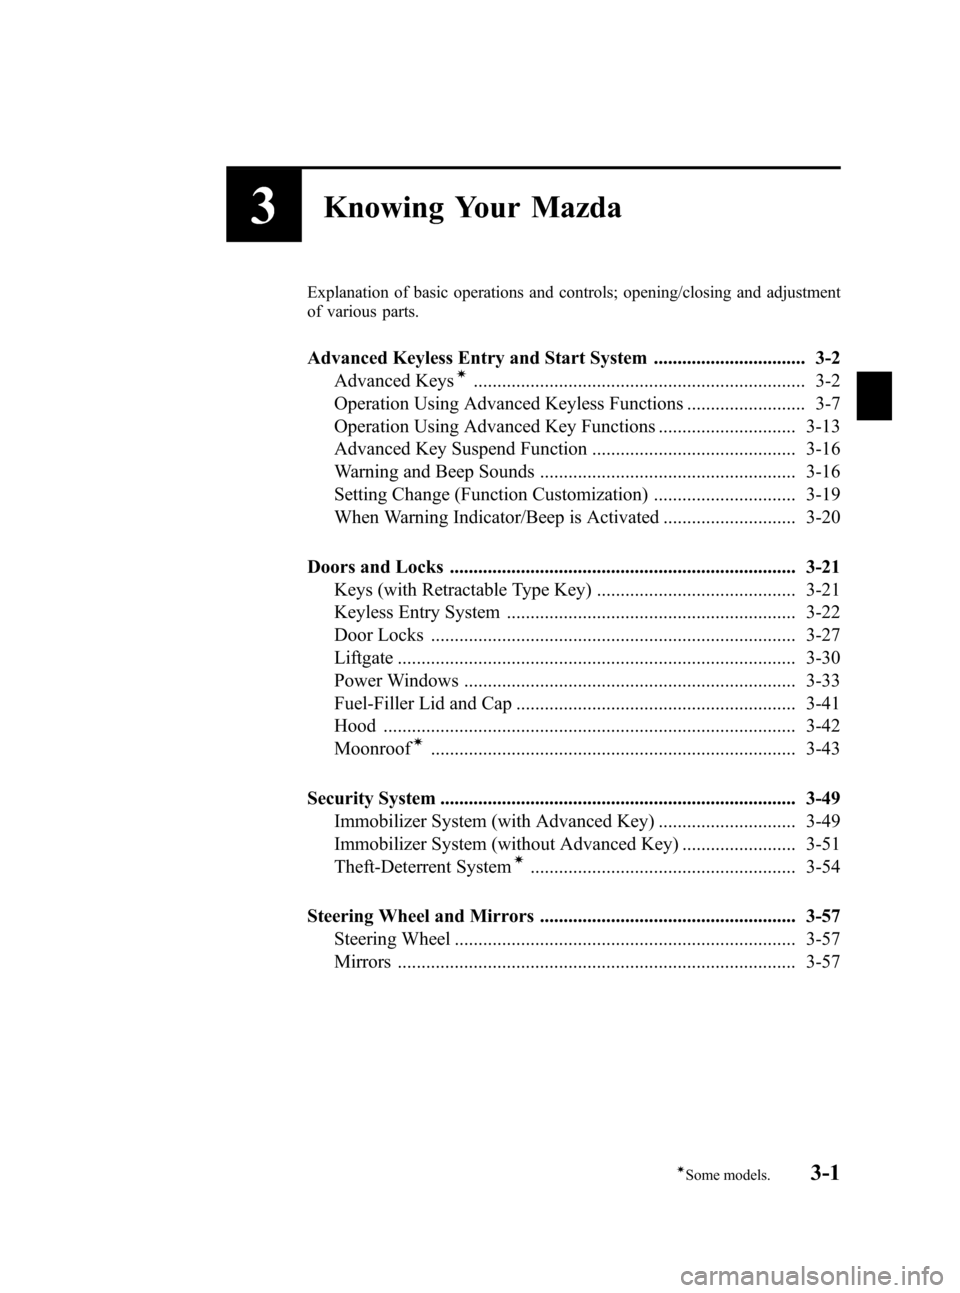 MAZDA MODEL CX-7 2009  Owners Manual (in English) Black plate (79,1)
3Knowing Your Mazda
Explanation of basic operations and controls; opening/closing and adjustment
of various parts.
Advanced Keyless Entry and Start System ..........................